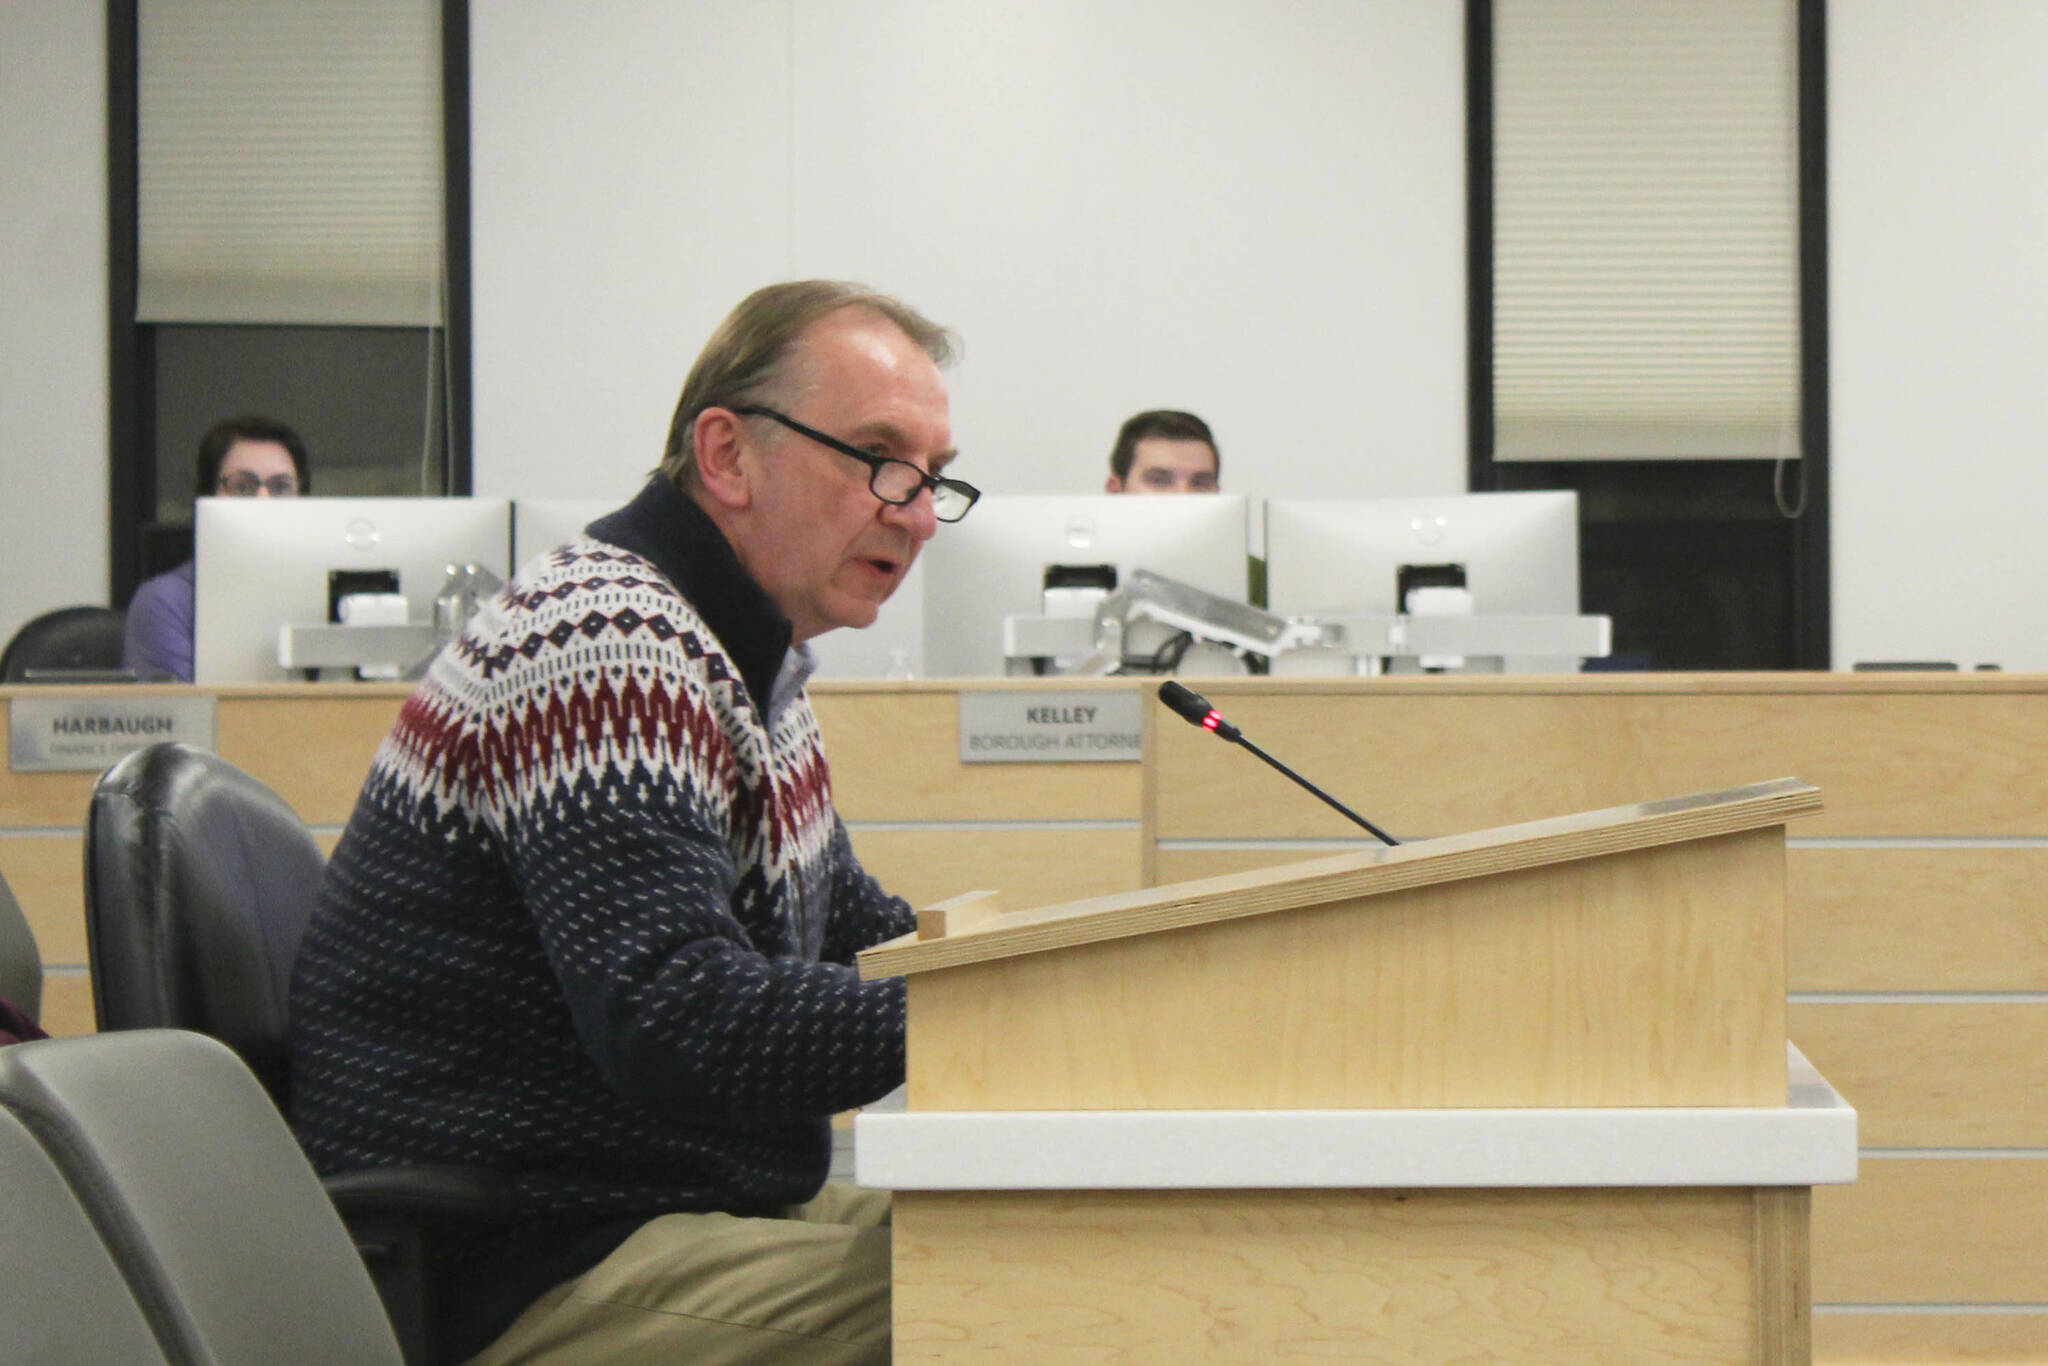 Tyonek Native Corporation CEO Stephen Peskosky testifies before the Kenai Peninsula Borough Assembly in opposition to inclusion of Tyonek in the Nikiski Advisory Planning Commission during an assembly meeting on Tuesday, Feb. 21, 2023 in Soldotna, Alaska. (Ashlyn O’Hara/Peninsula Clarion)